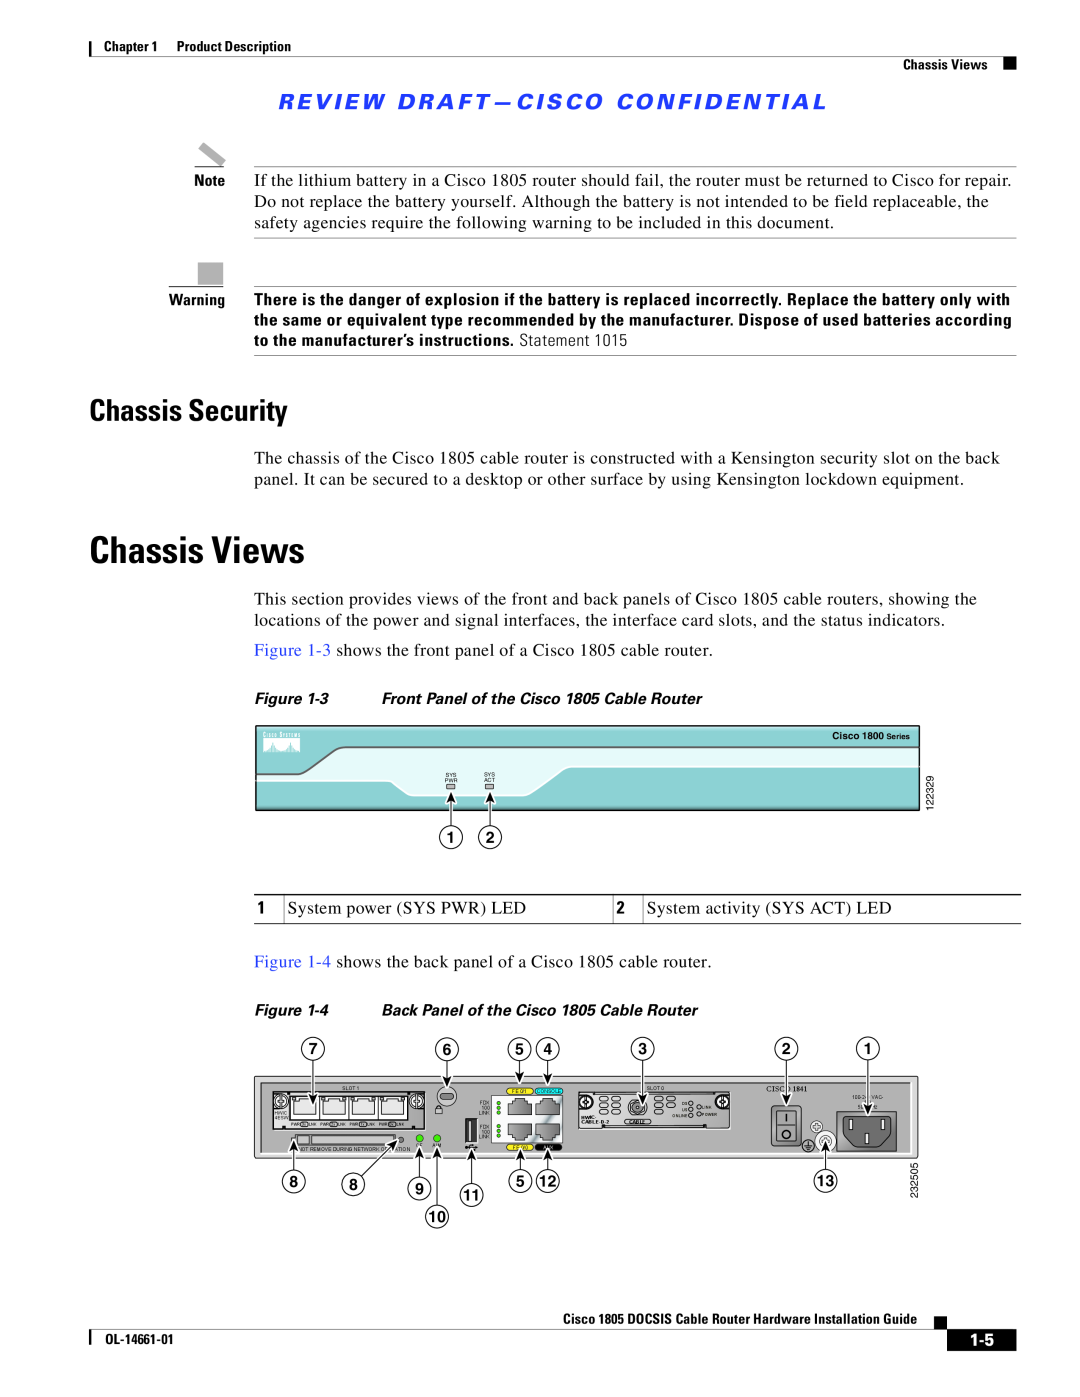 Cisco Systems CISCO1805-D/K9, CISCO1805-E specifications Chassis Views, Chassis Security, Review Draft - Cisco Confidential 